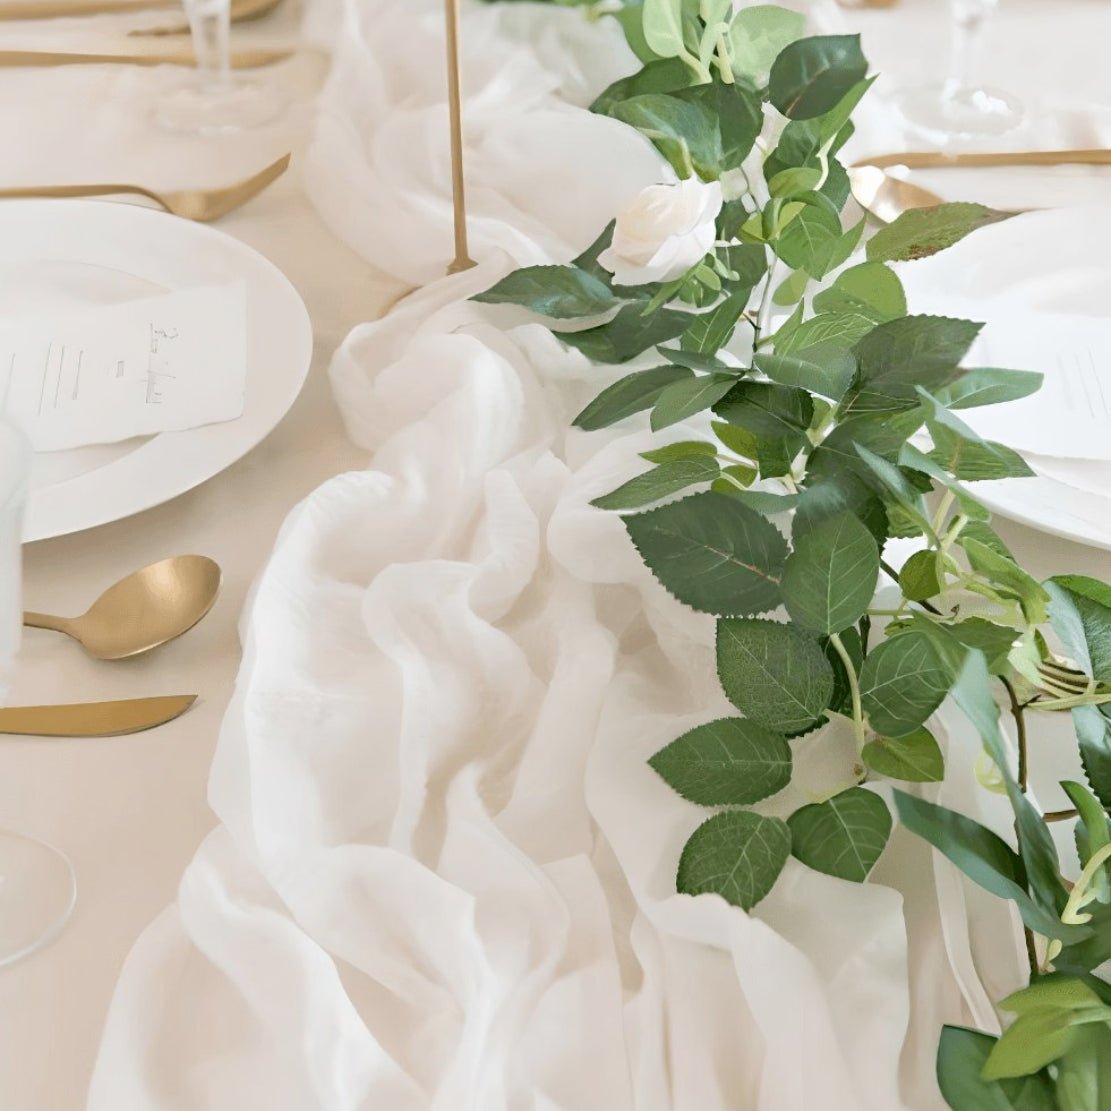 White, thin, elegant table runner with green leafs